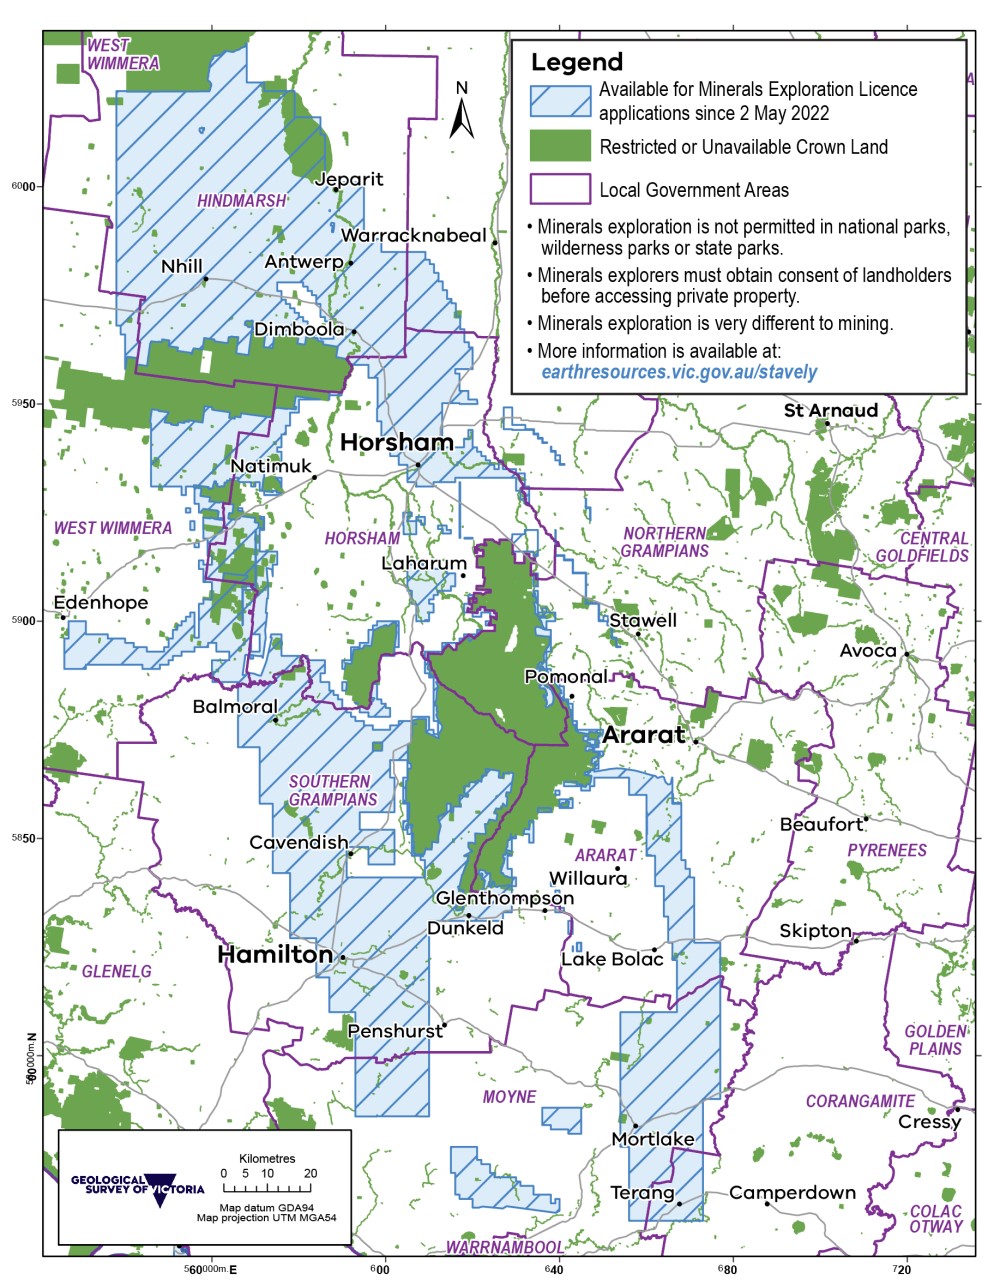 Map of the Stavely Project Area indicating towns, areas available for minerals exploration licence applications, local government areas, and restricted or unavailable crown lands